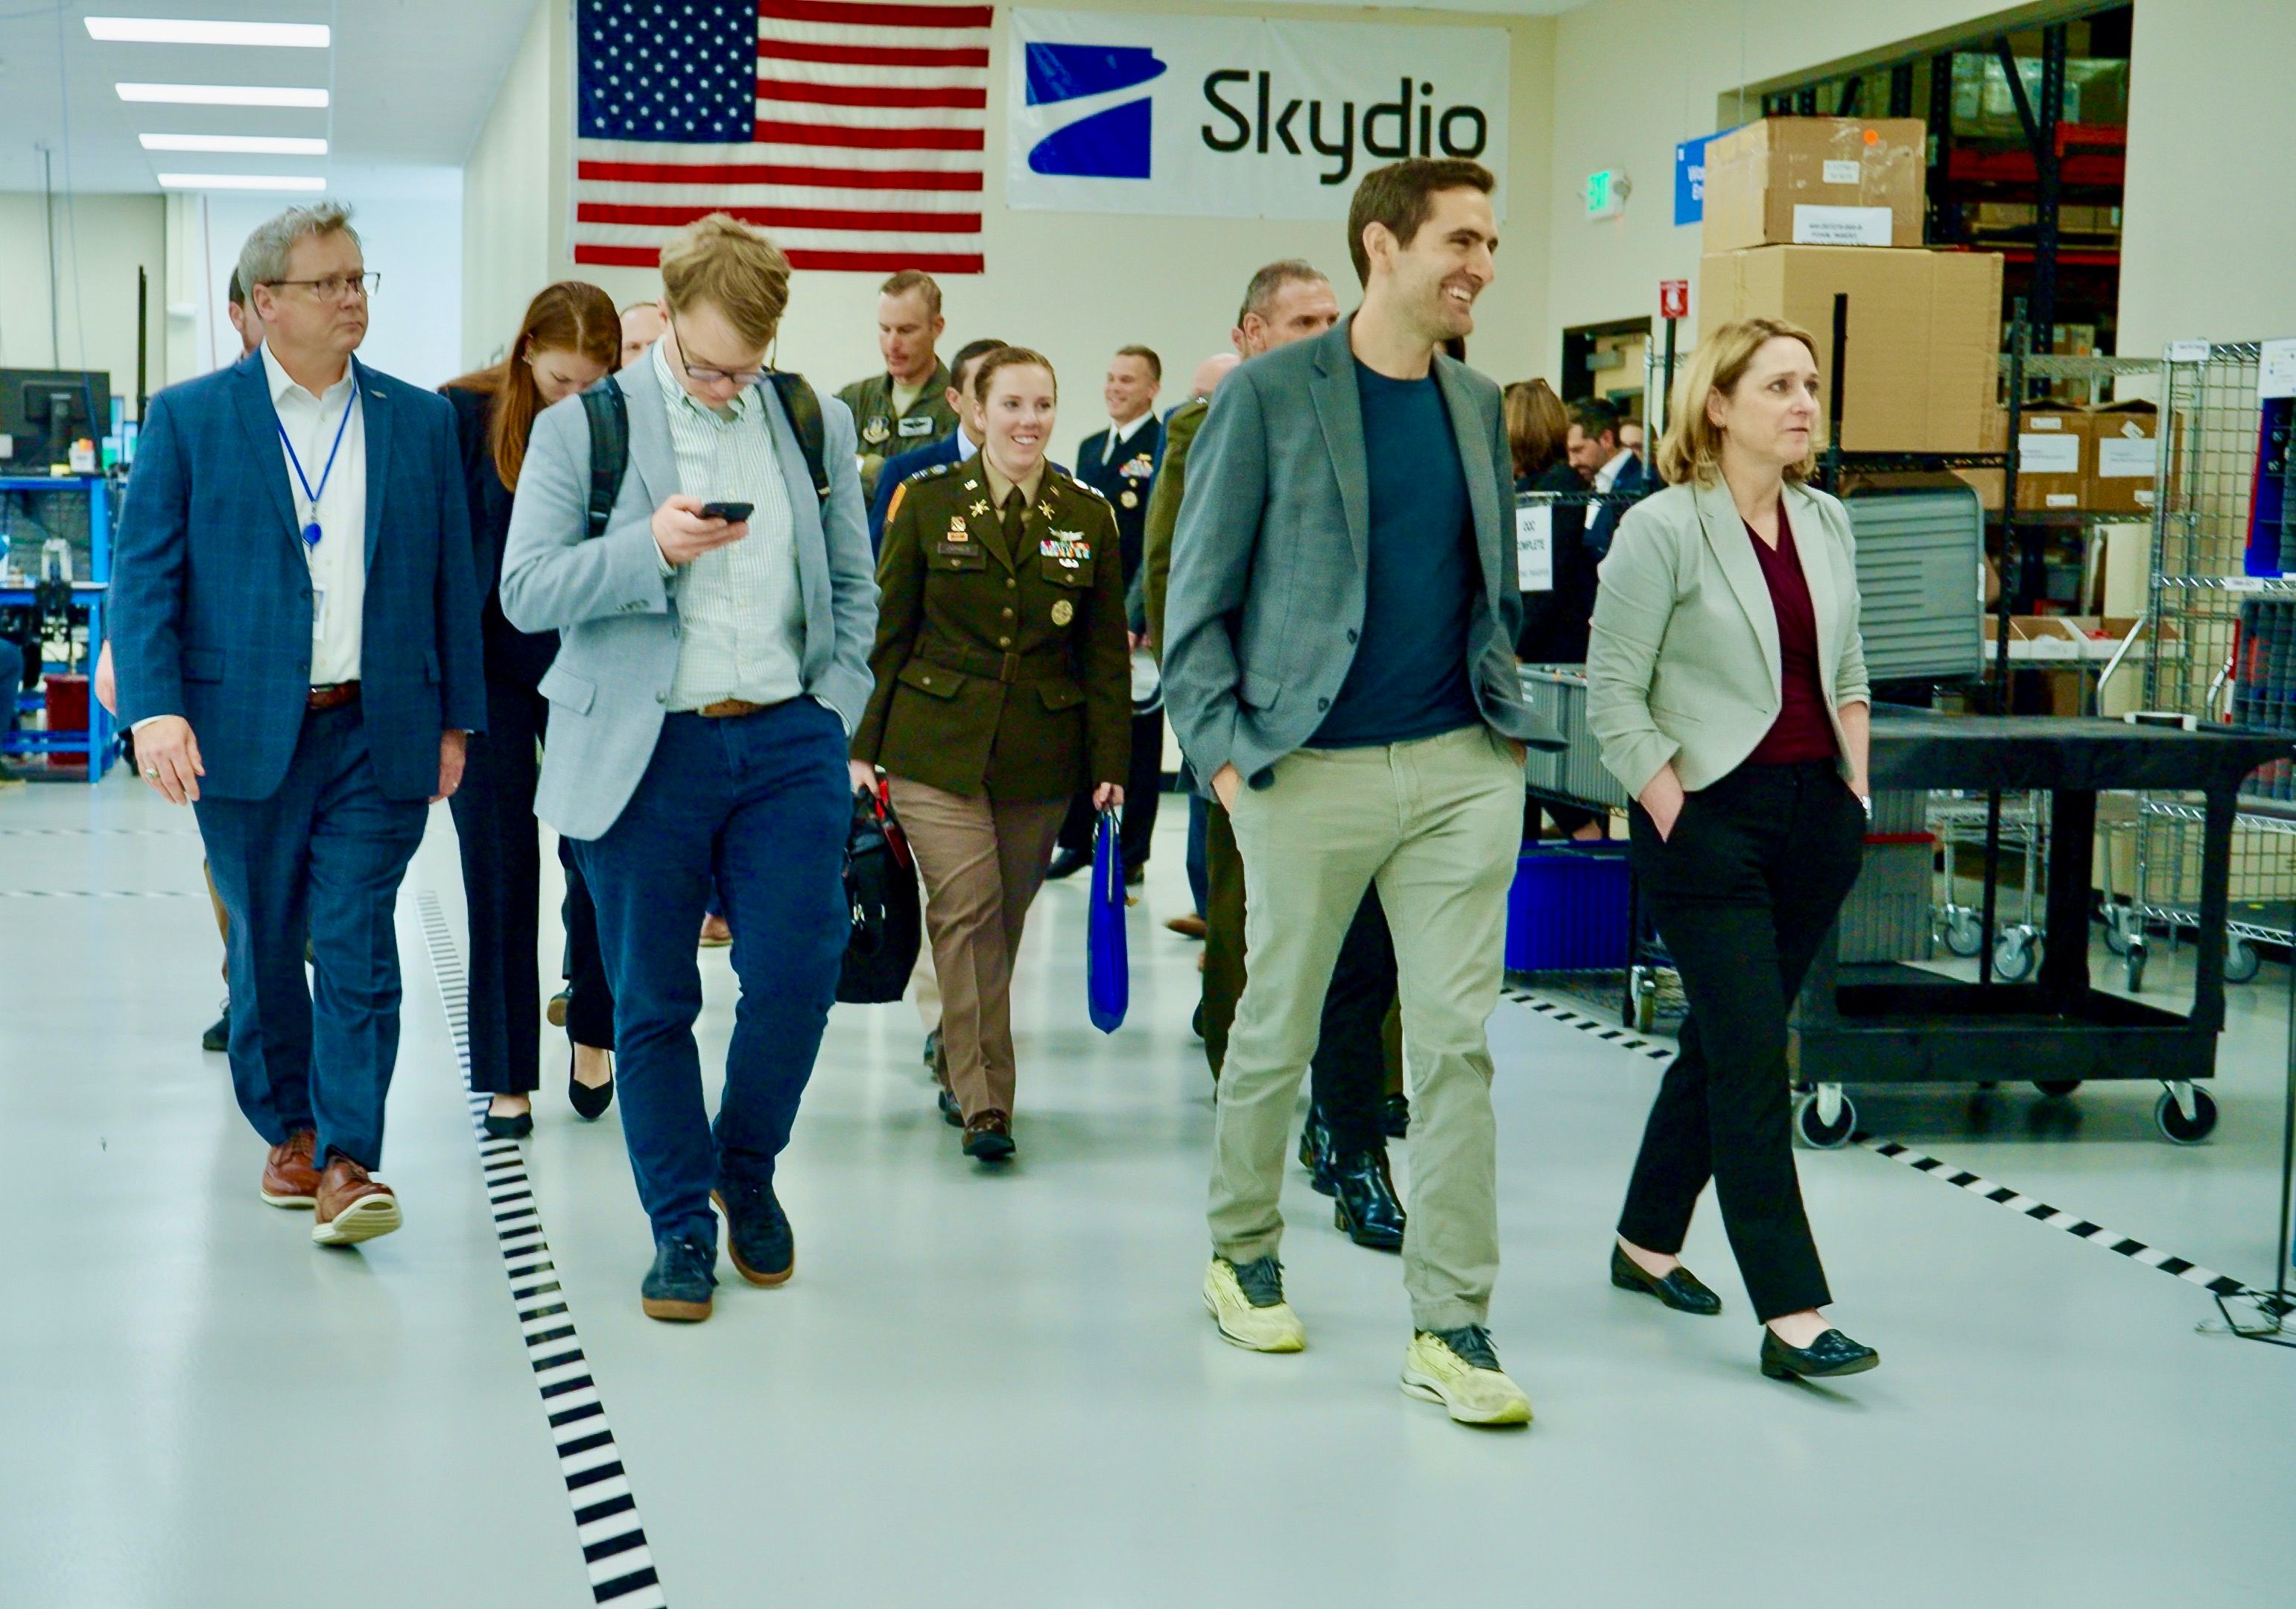 Visits by DoD’s Top Leaders Underscore Skydio’s Commitment to Delivering Small Autonomous Systems to America’s Armed Forces